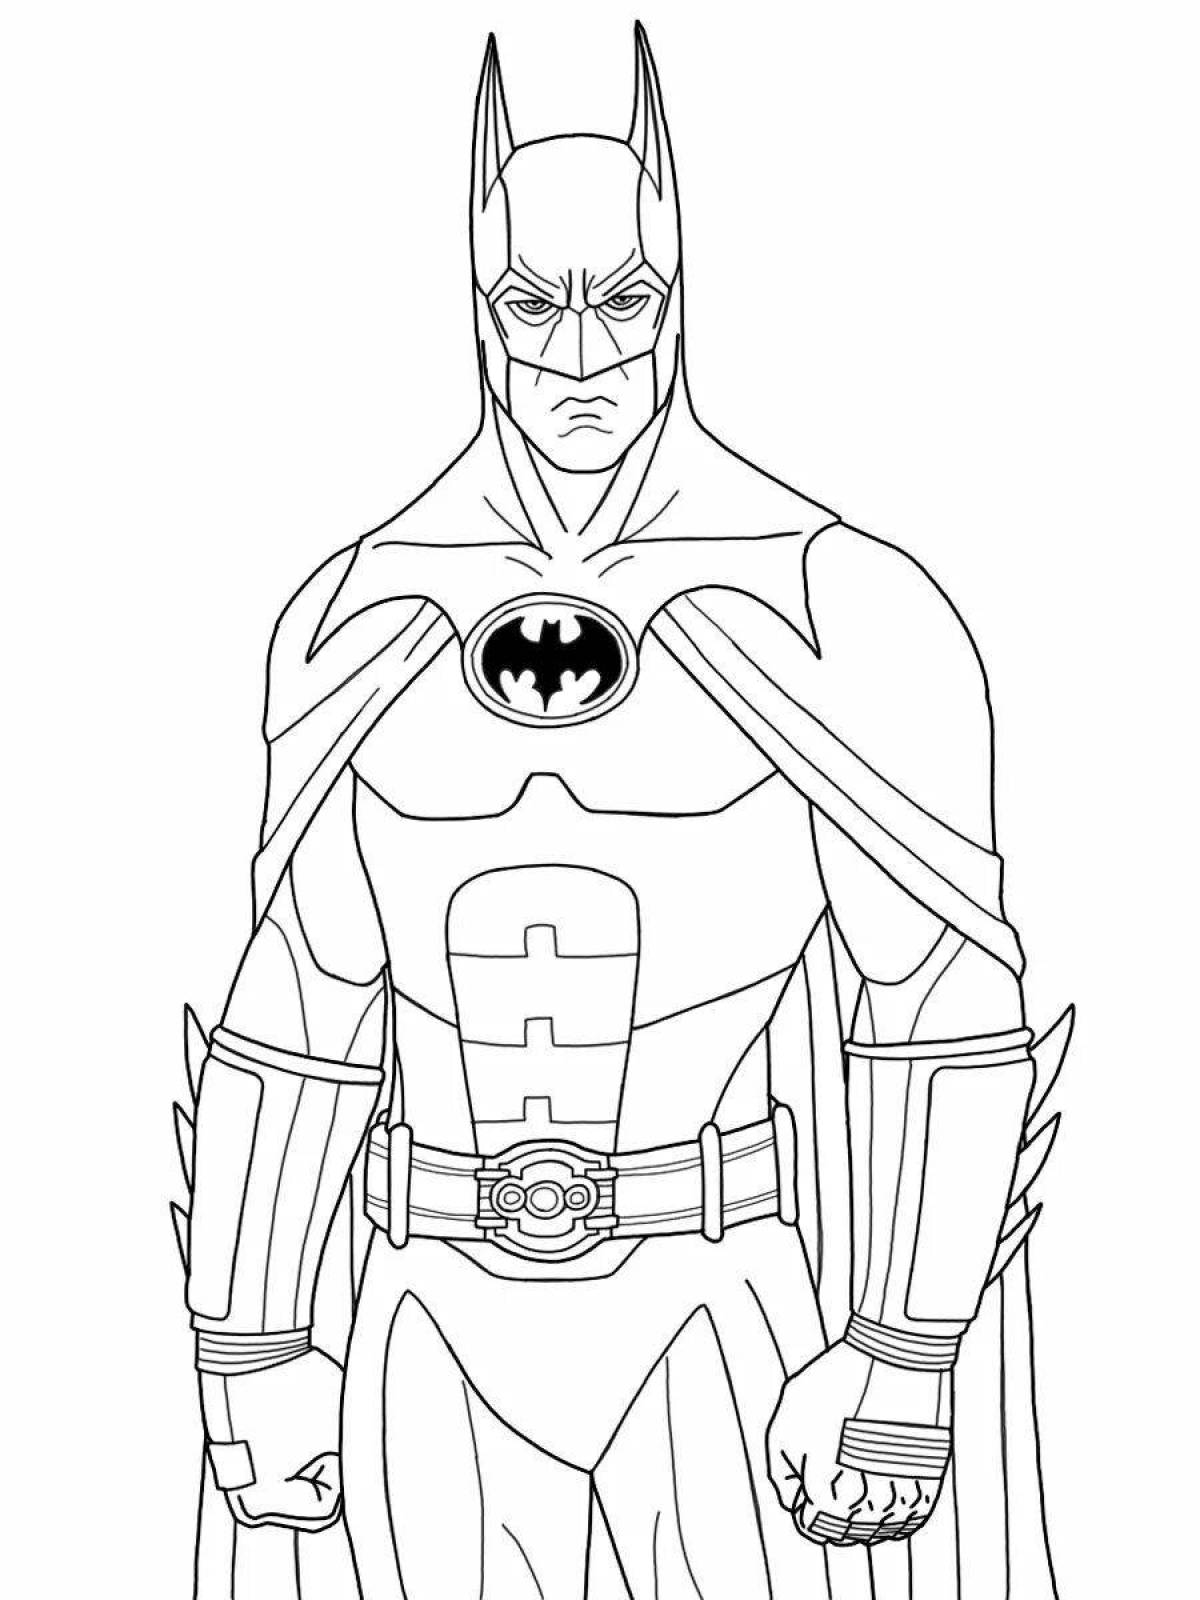 Batman colorful coloring book for 3-4 year olds